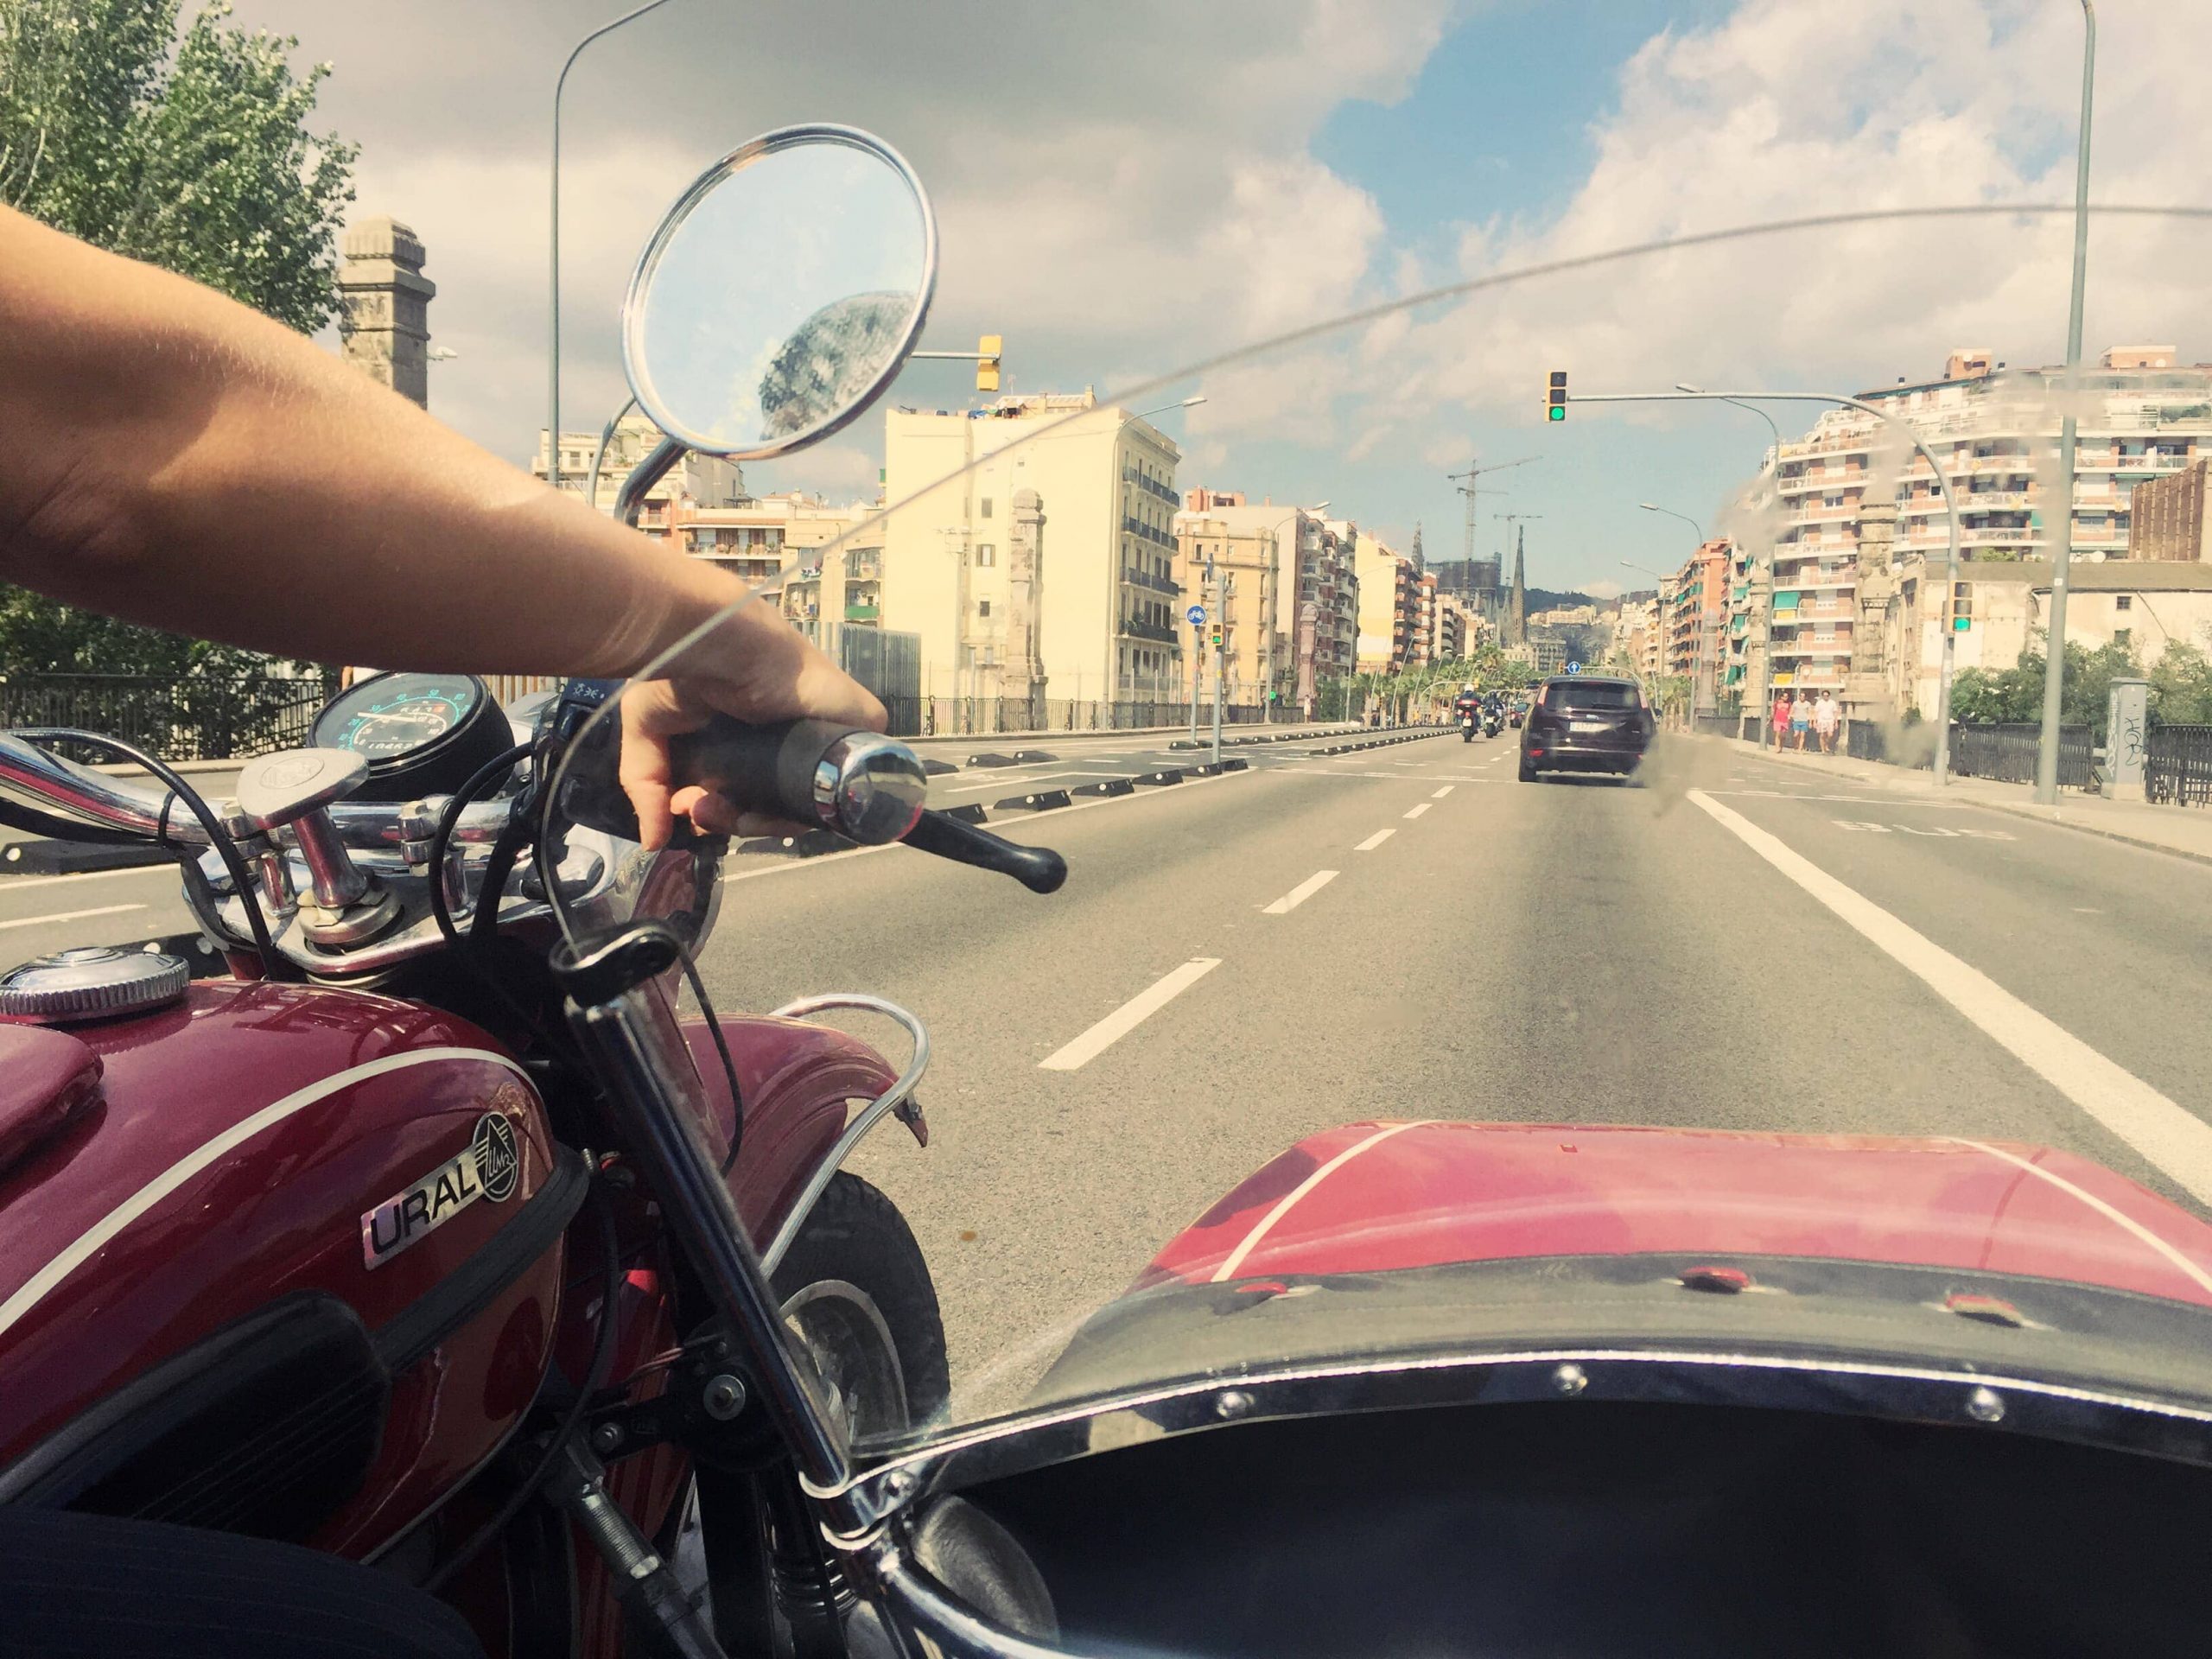 Get a 360 degree tour of Barcelona in a sidecar